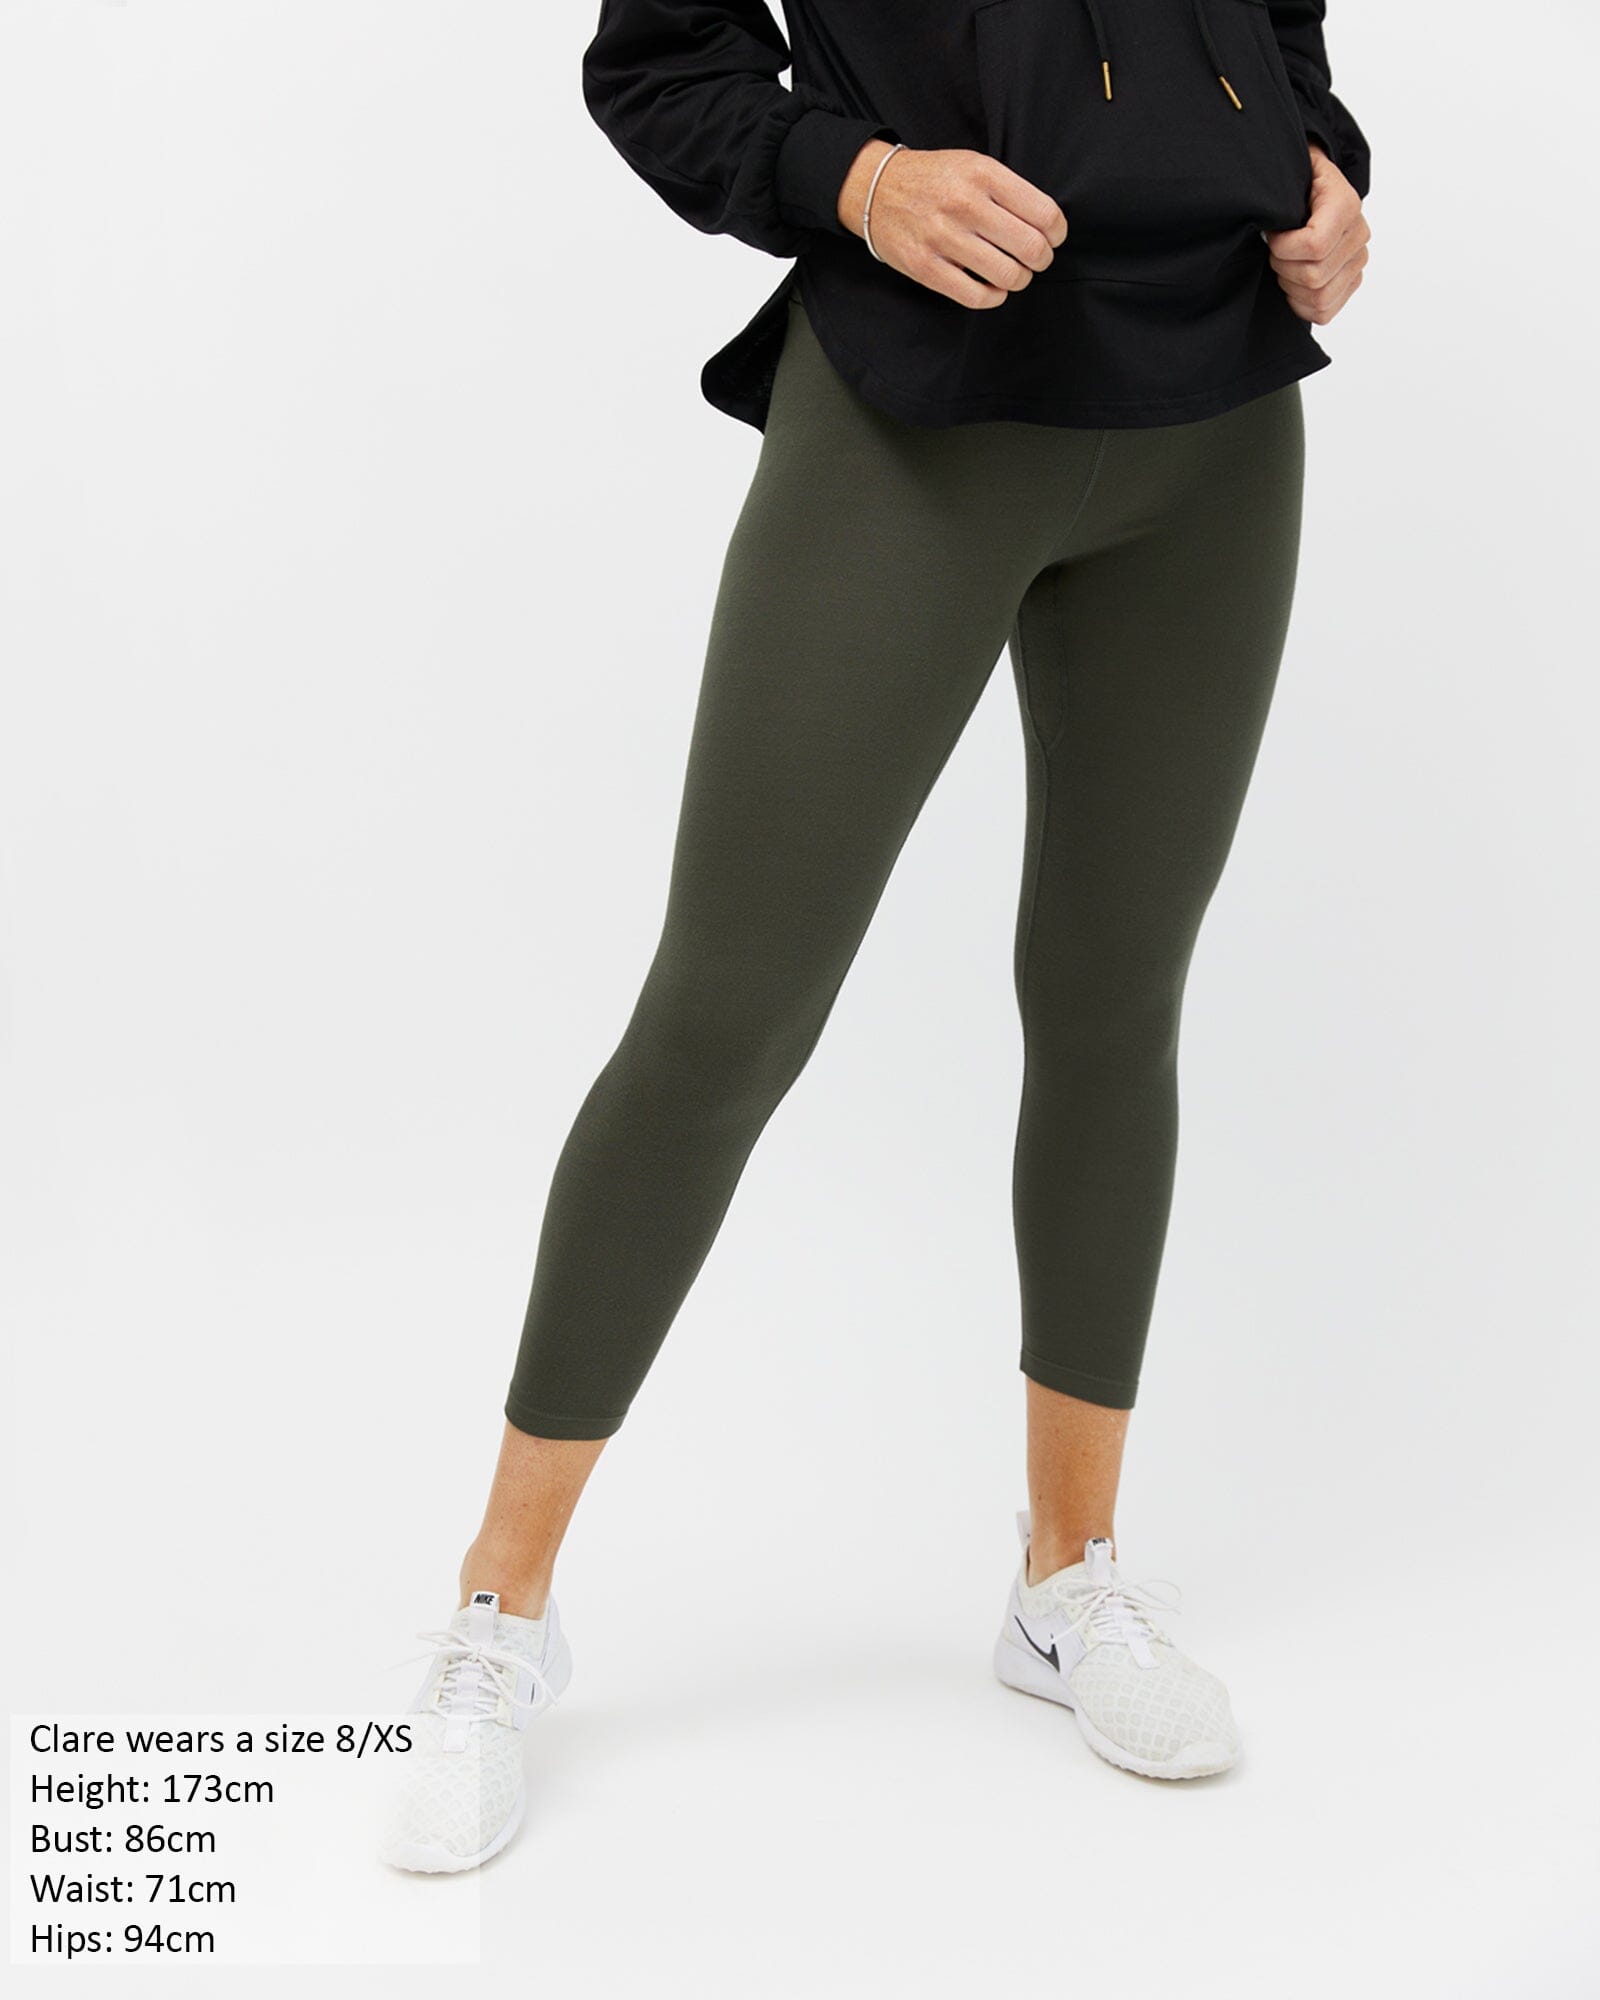 The ultimate comfy leggings - Cropped Moss Leggings Avila the label 8/XS FIRM 